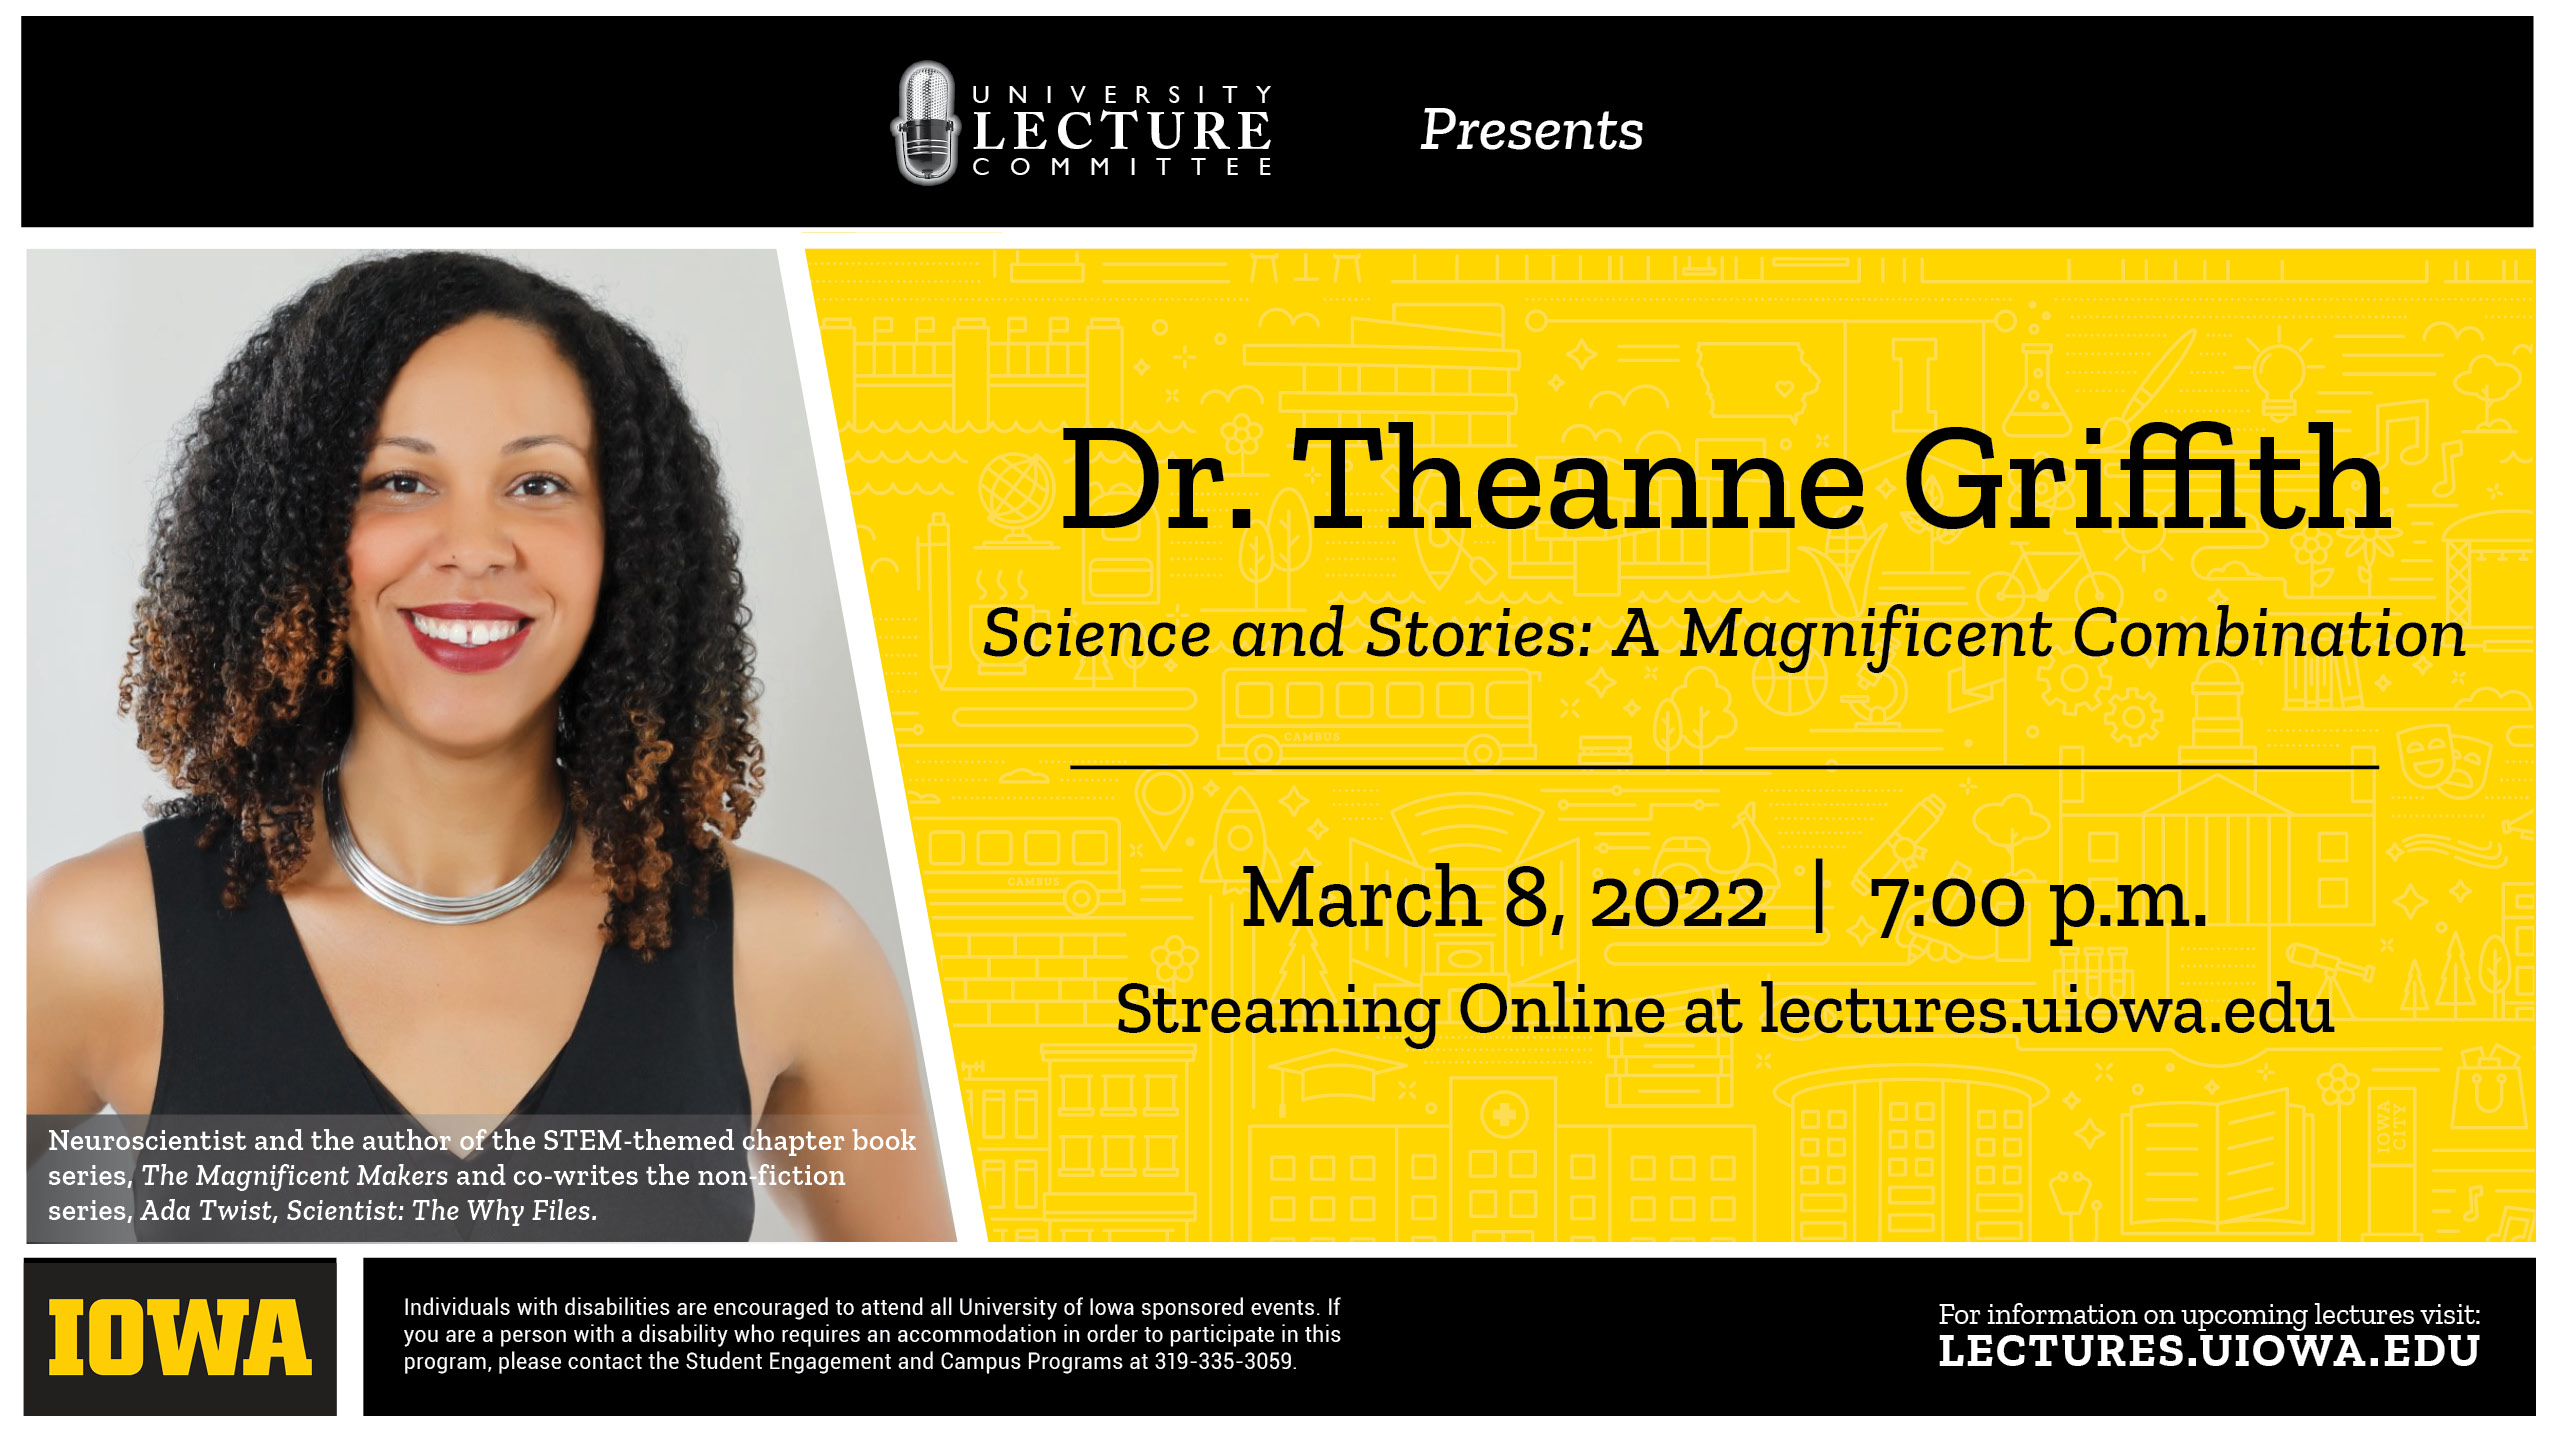 University Lecture Committee present Dr. Theanne Griffith Science and Stores: A Magnificent Combination. March 8, 2022 | 7 p.m. Streaming online at lectures.uiowa.edu